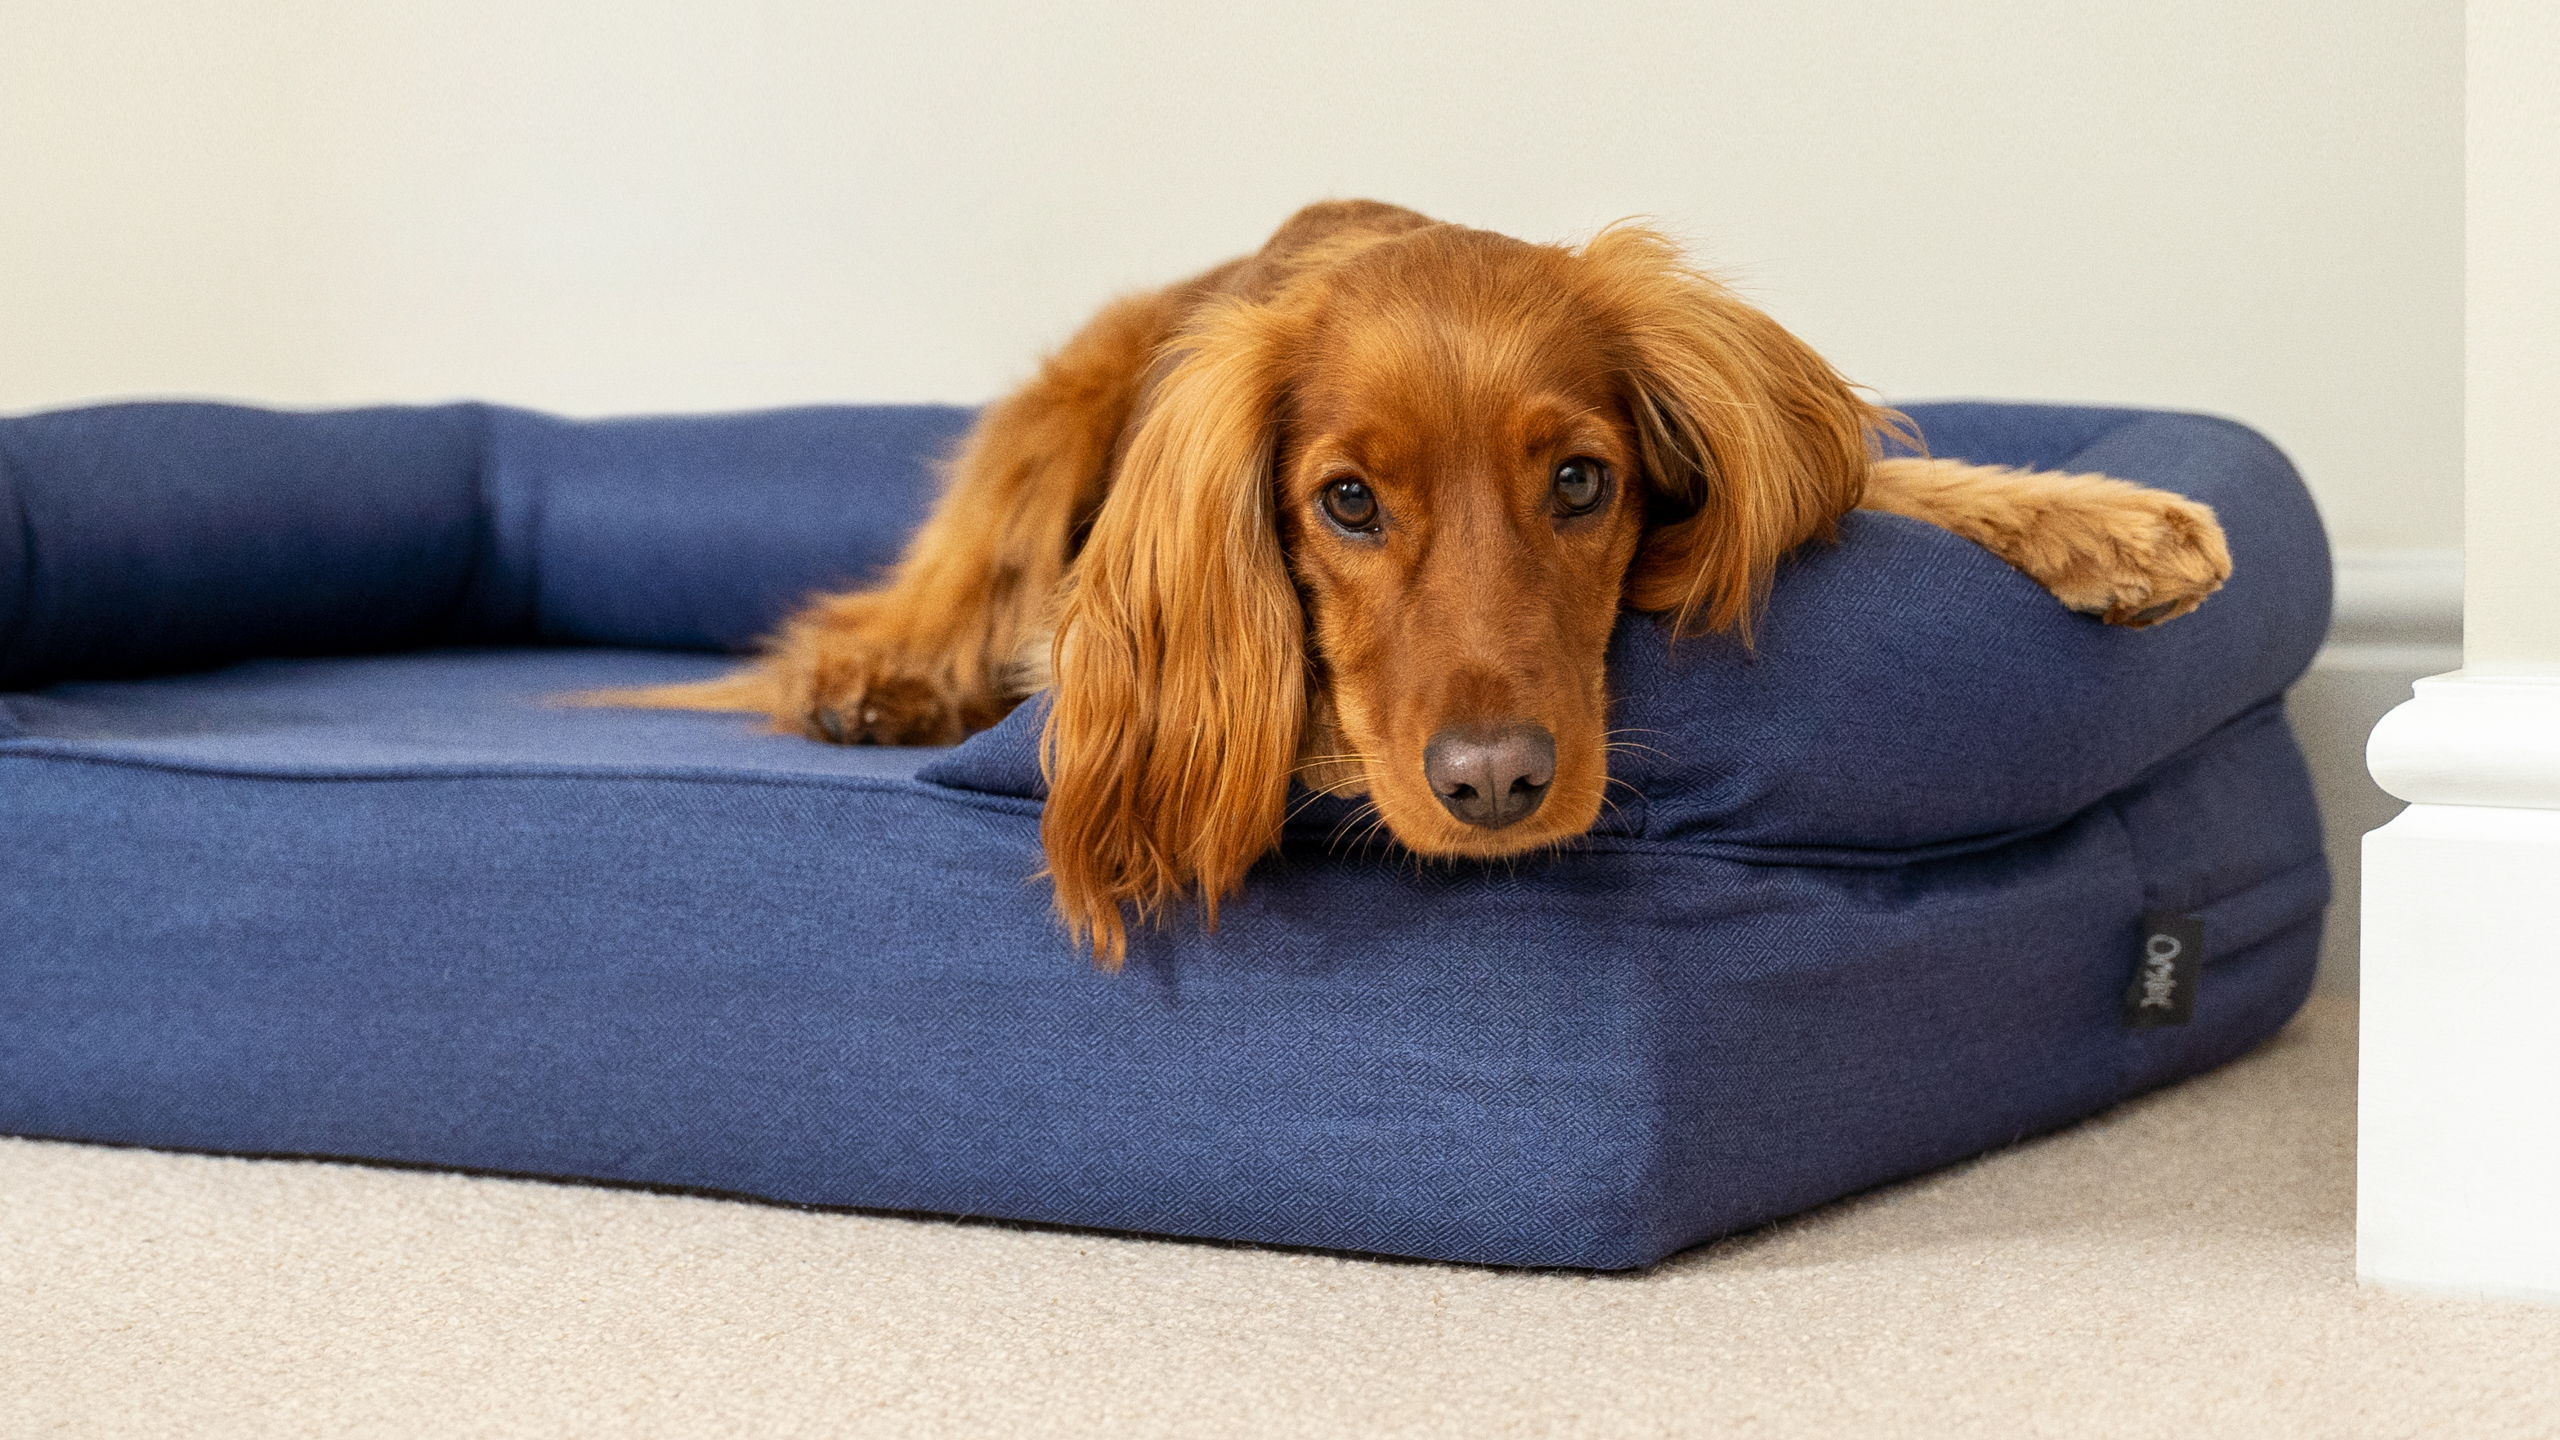 Your dog will enjoy unrivalled levels of comfort with Omlet’s Bolster Dog Bed